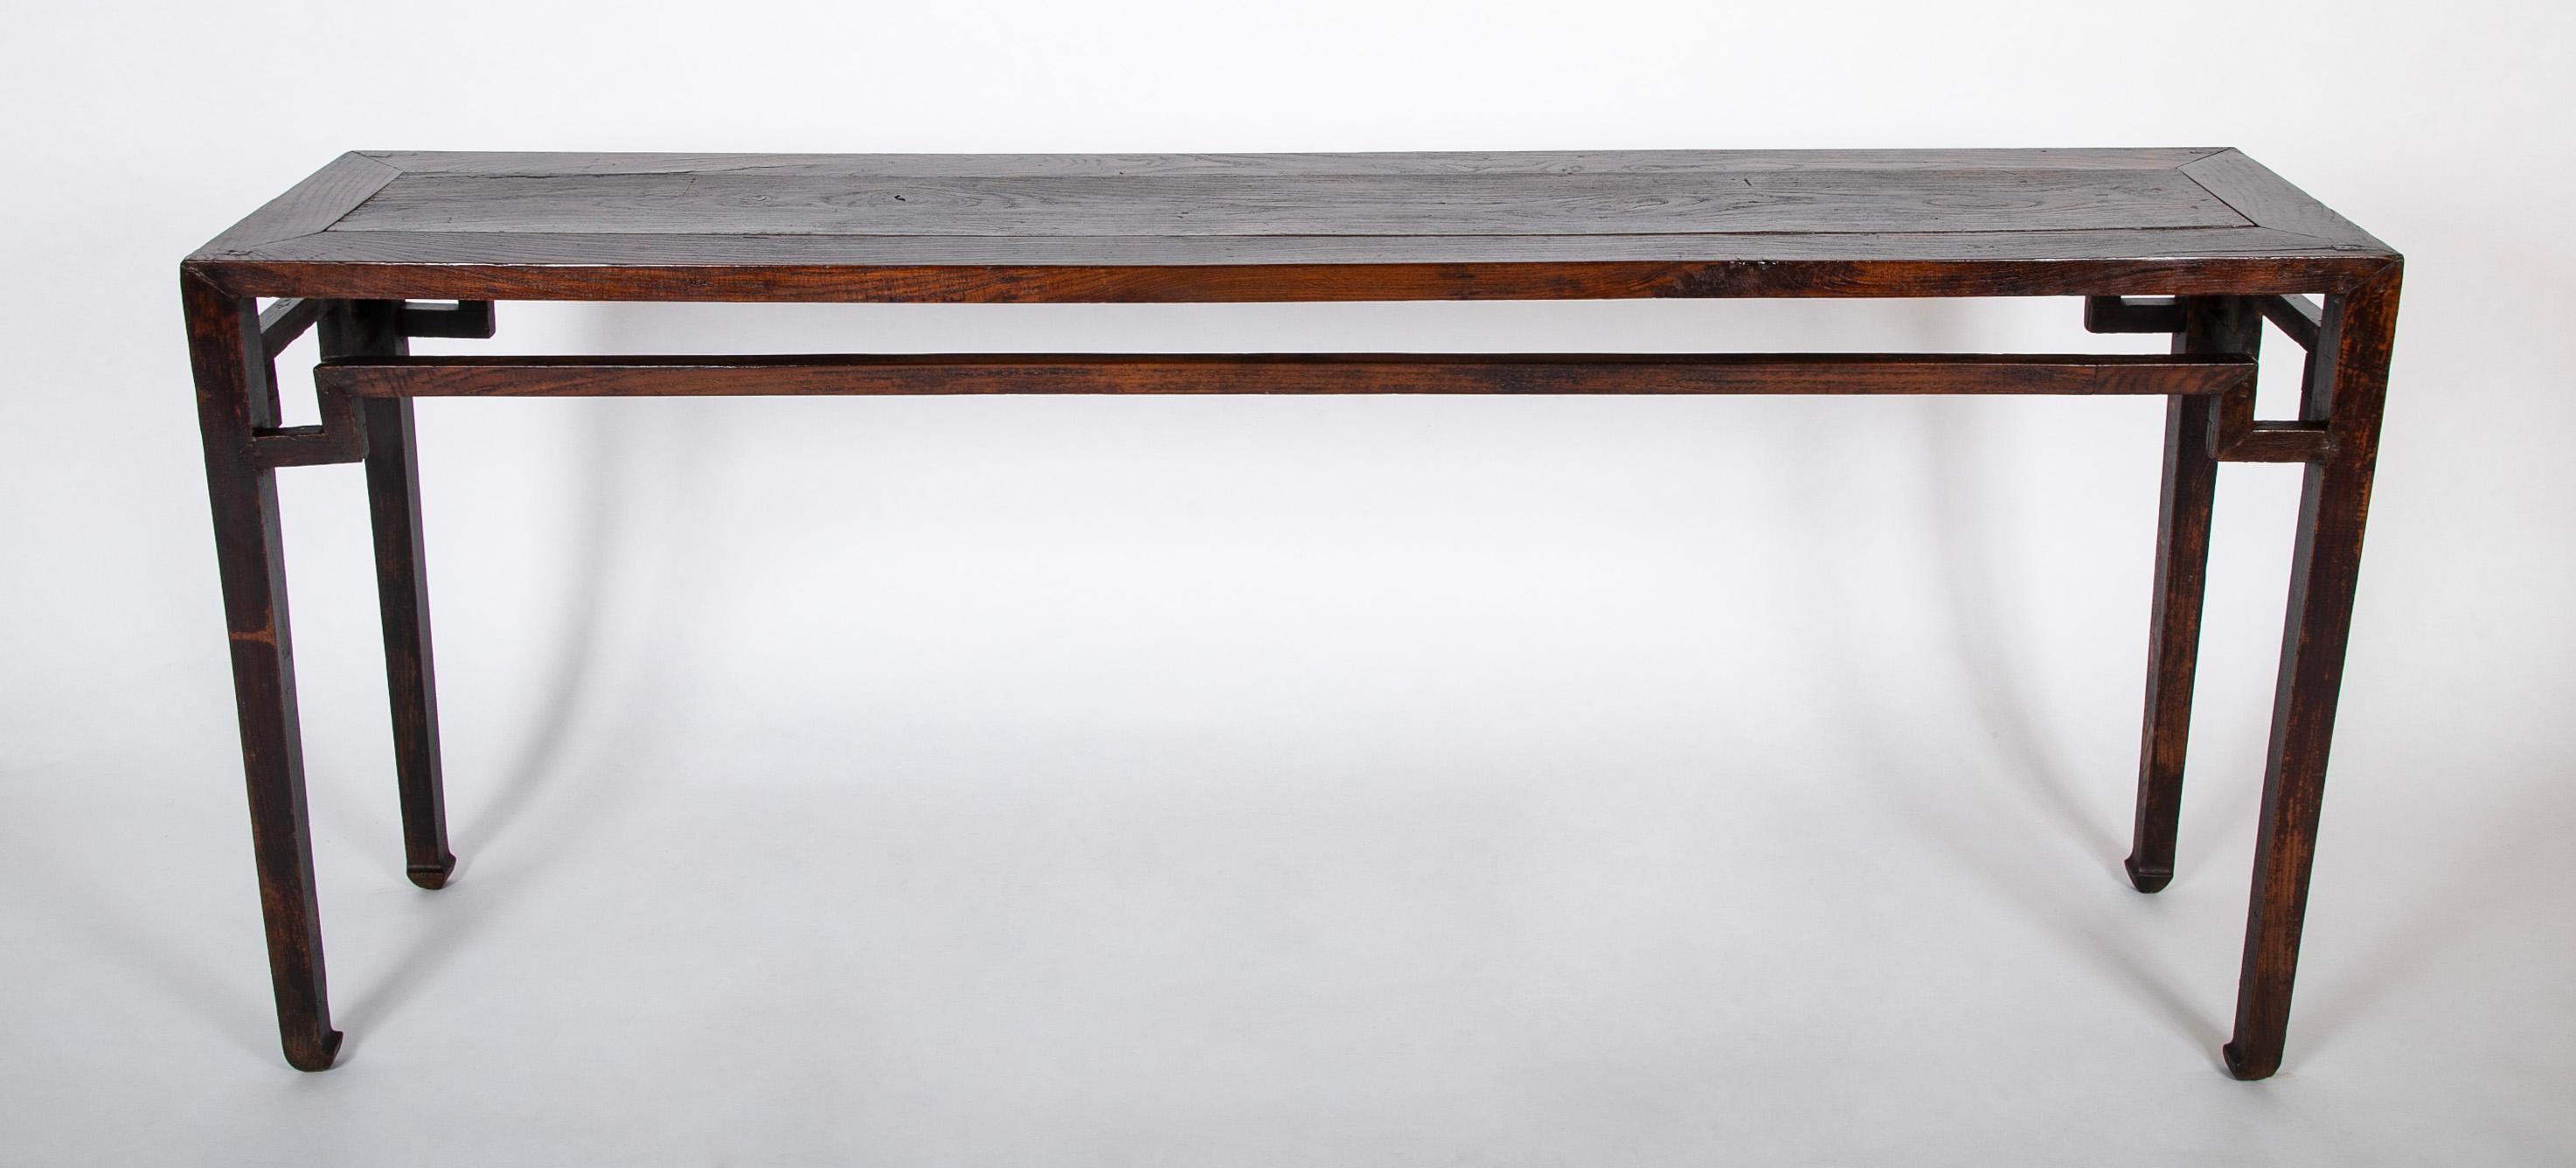 18th century Chinese elm console table with square form humpback stretchers.  Shanxi Province.  